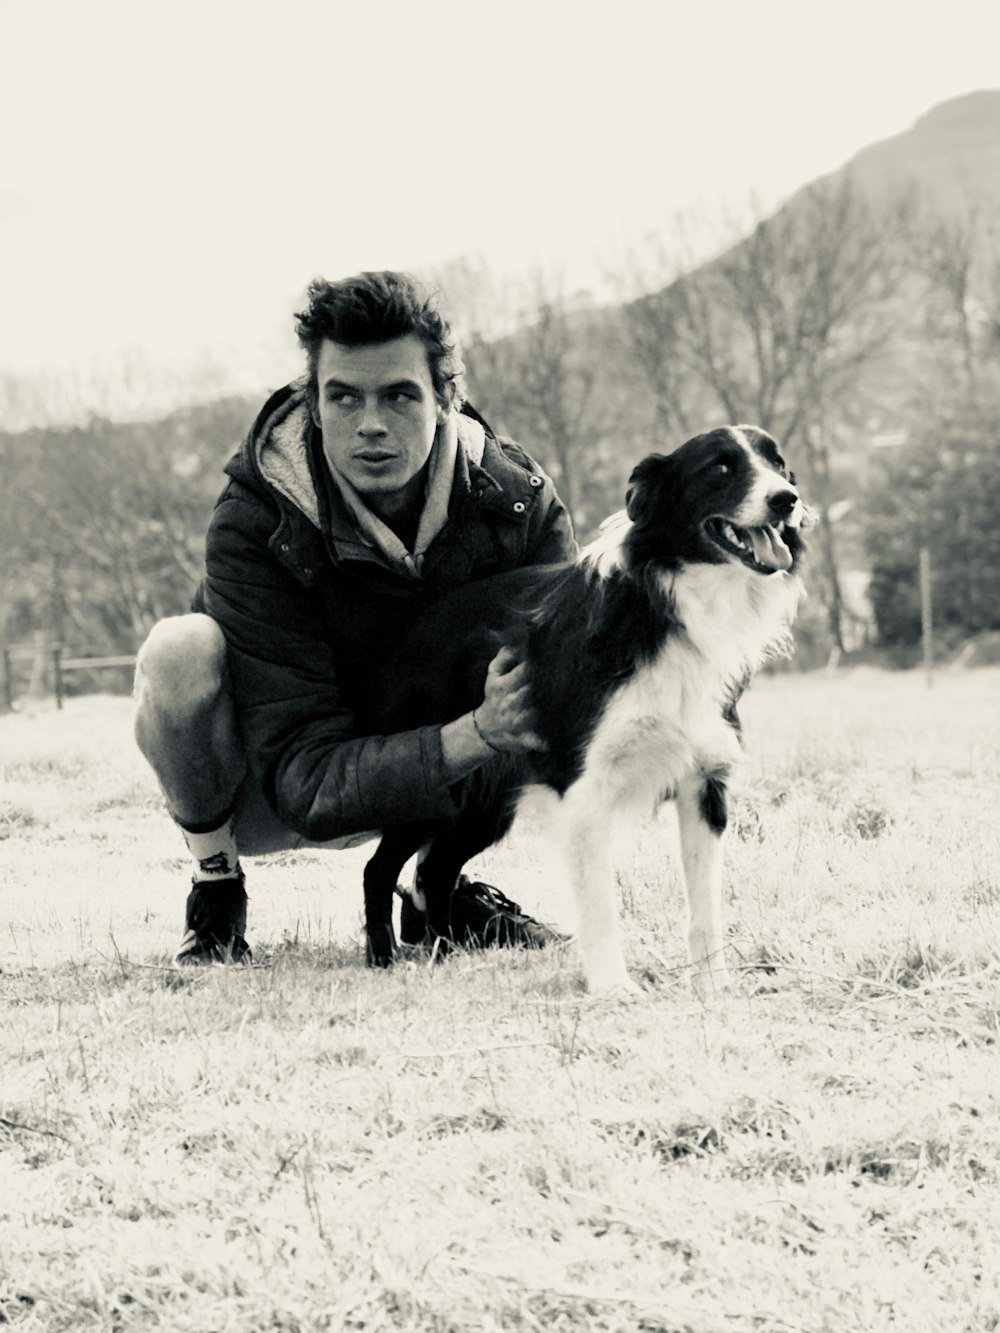 grayscale photography of man holding dog near outdoor during daytime